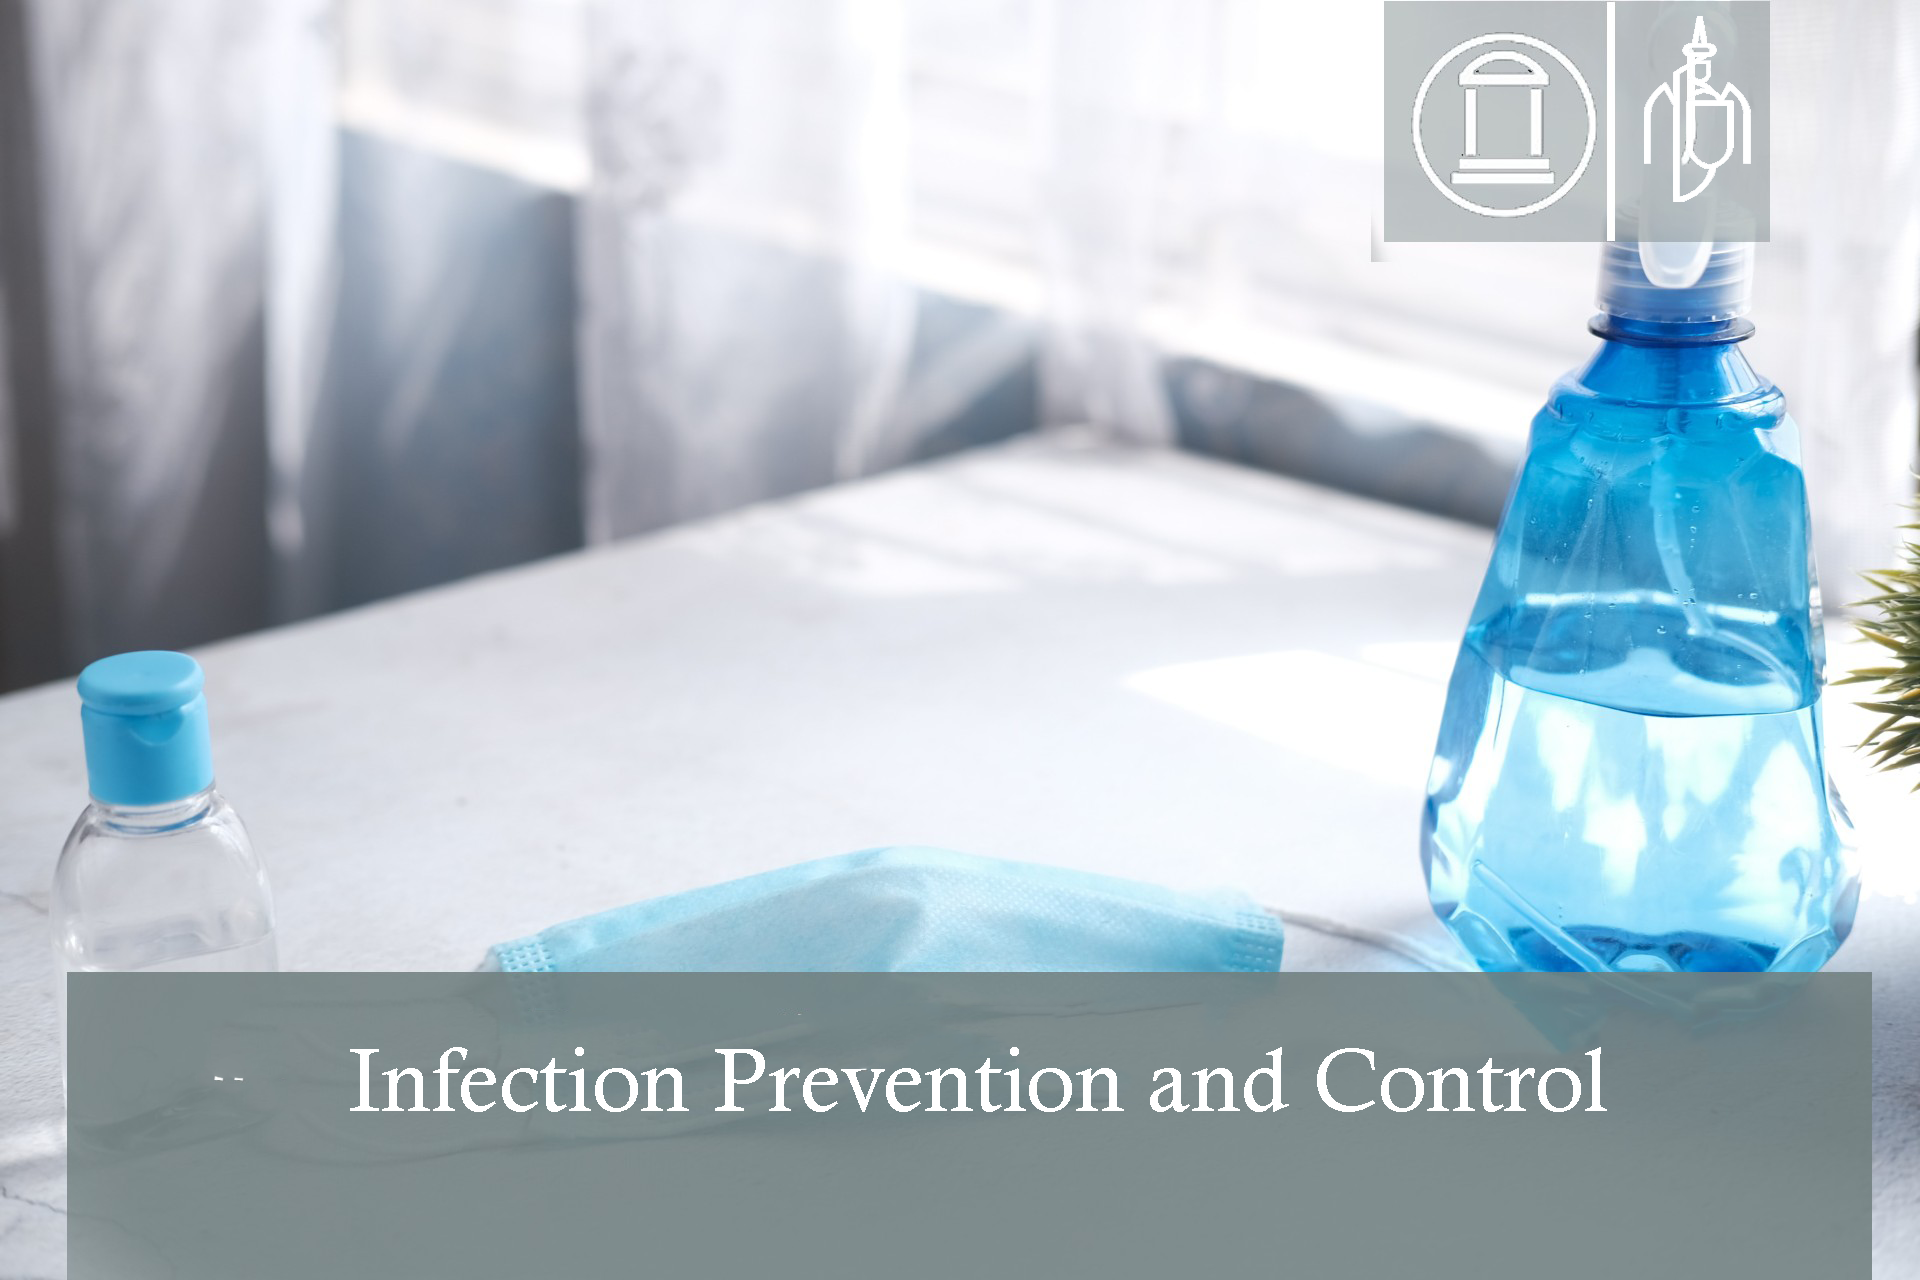 Infection Prevention and Control SMHOO 2020 - Information Resource - Complete Unit 1 Only